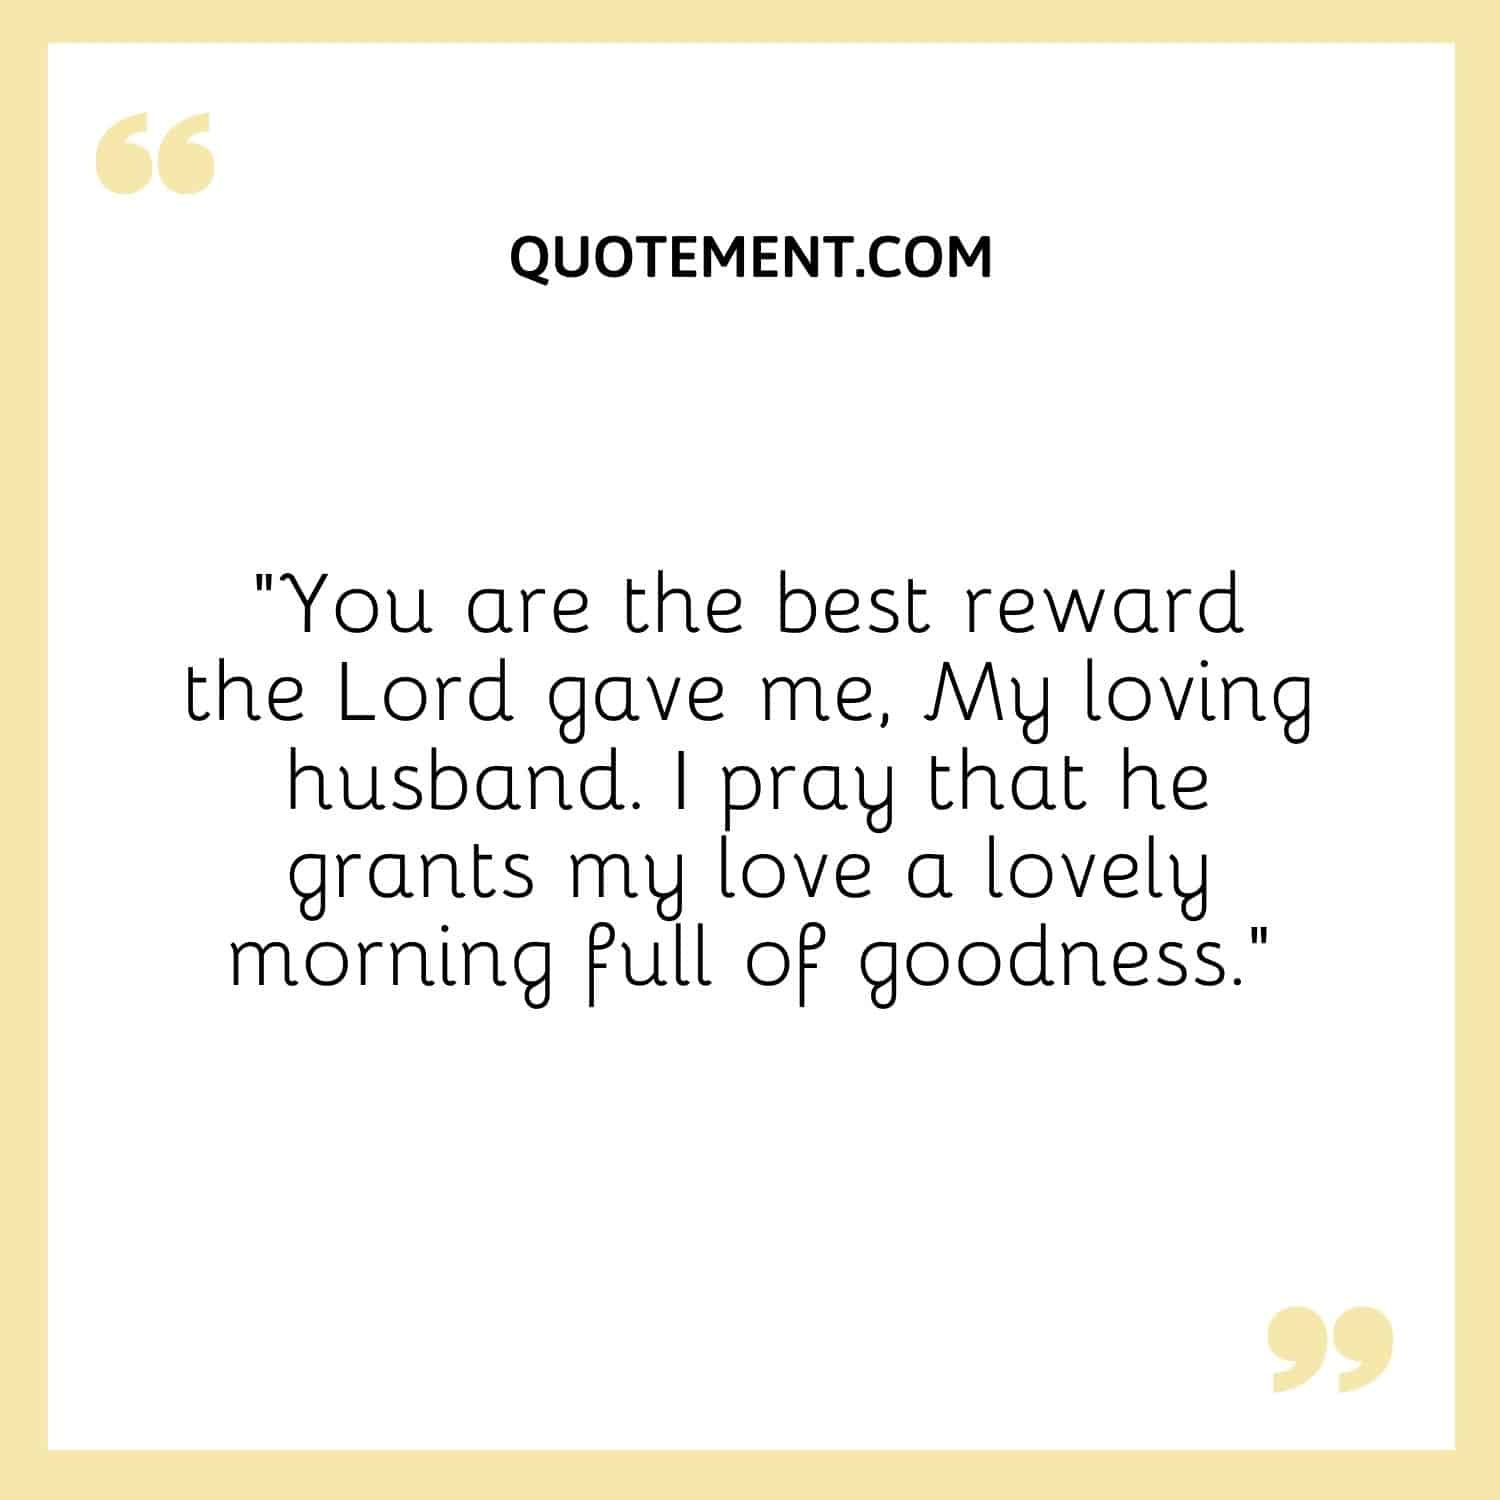 You are the best reward the Lord gave me